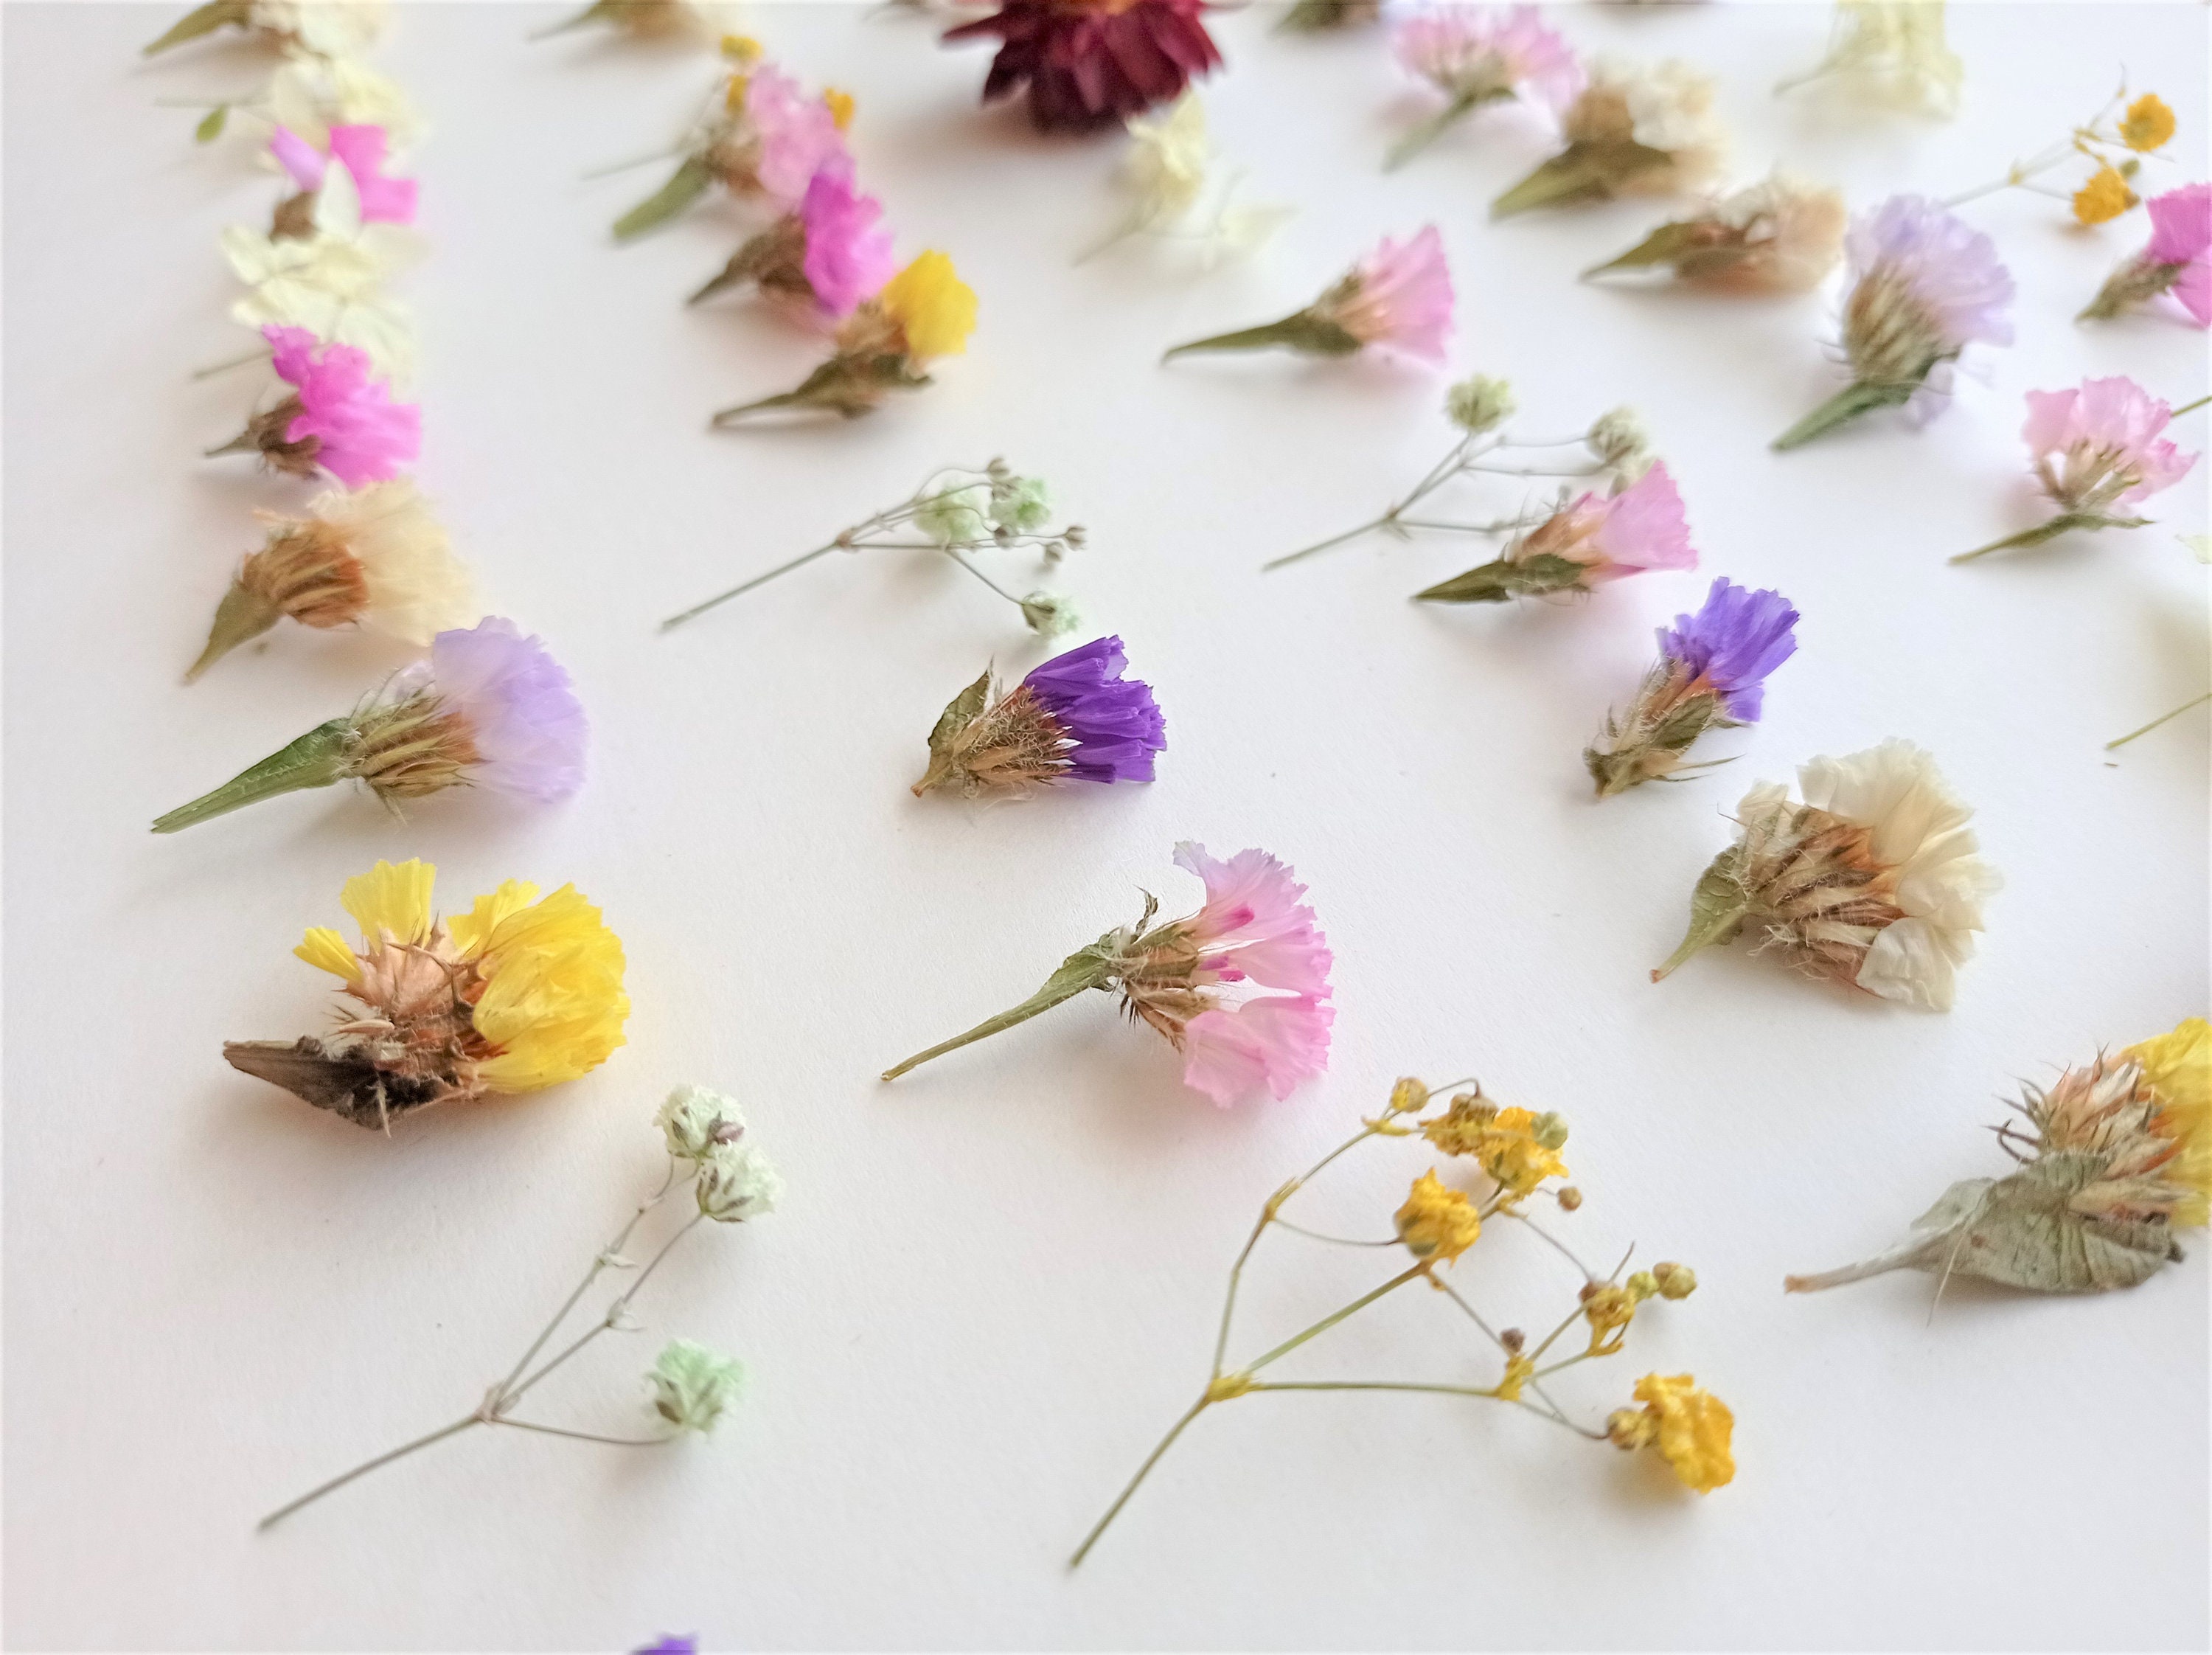 Baywell 15Pcs Dried Flowers for Resin Molds, Natural Dried Pressed